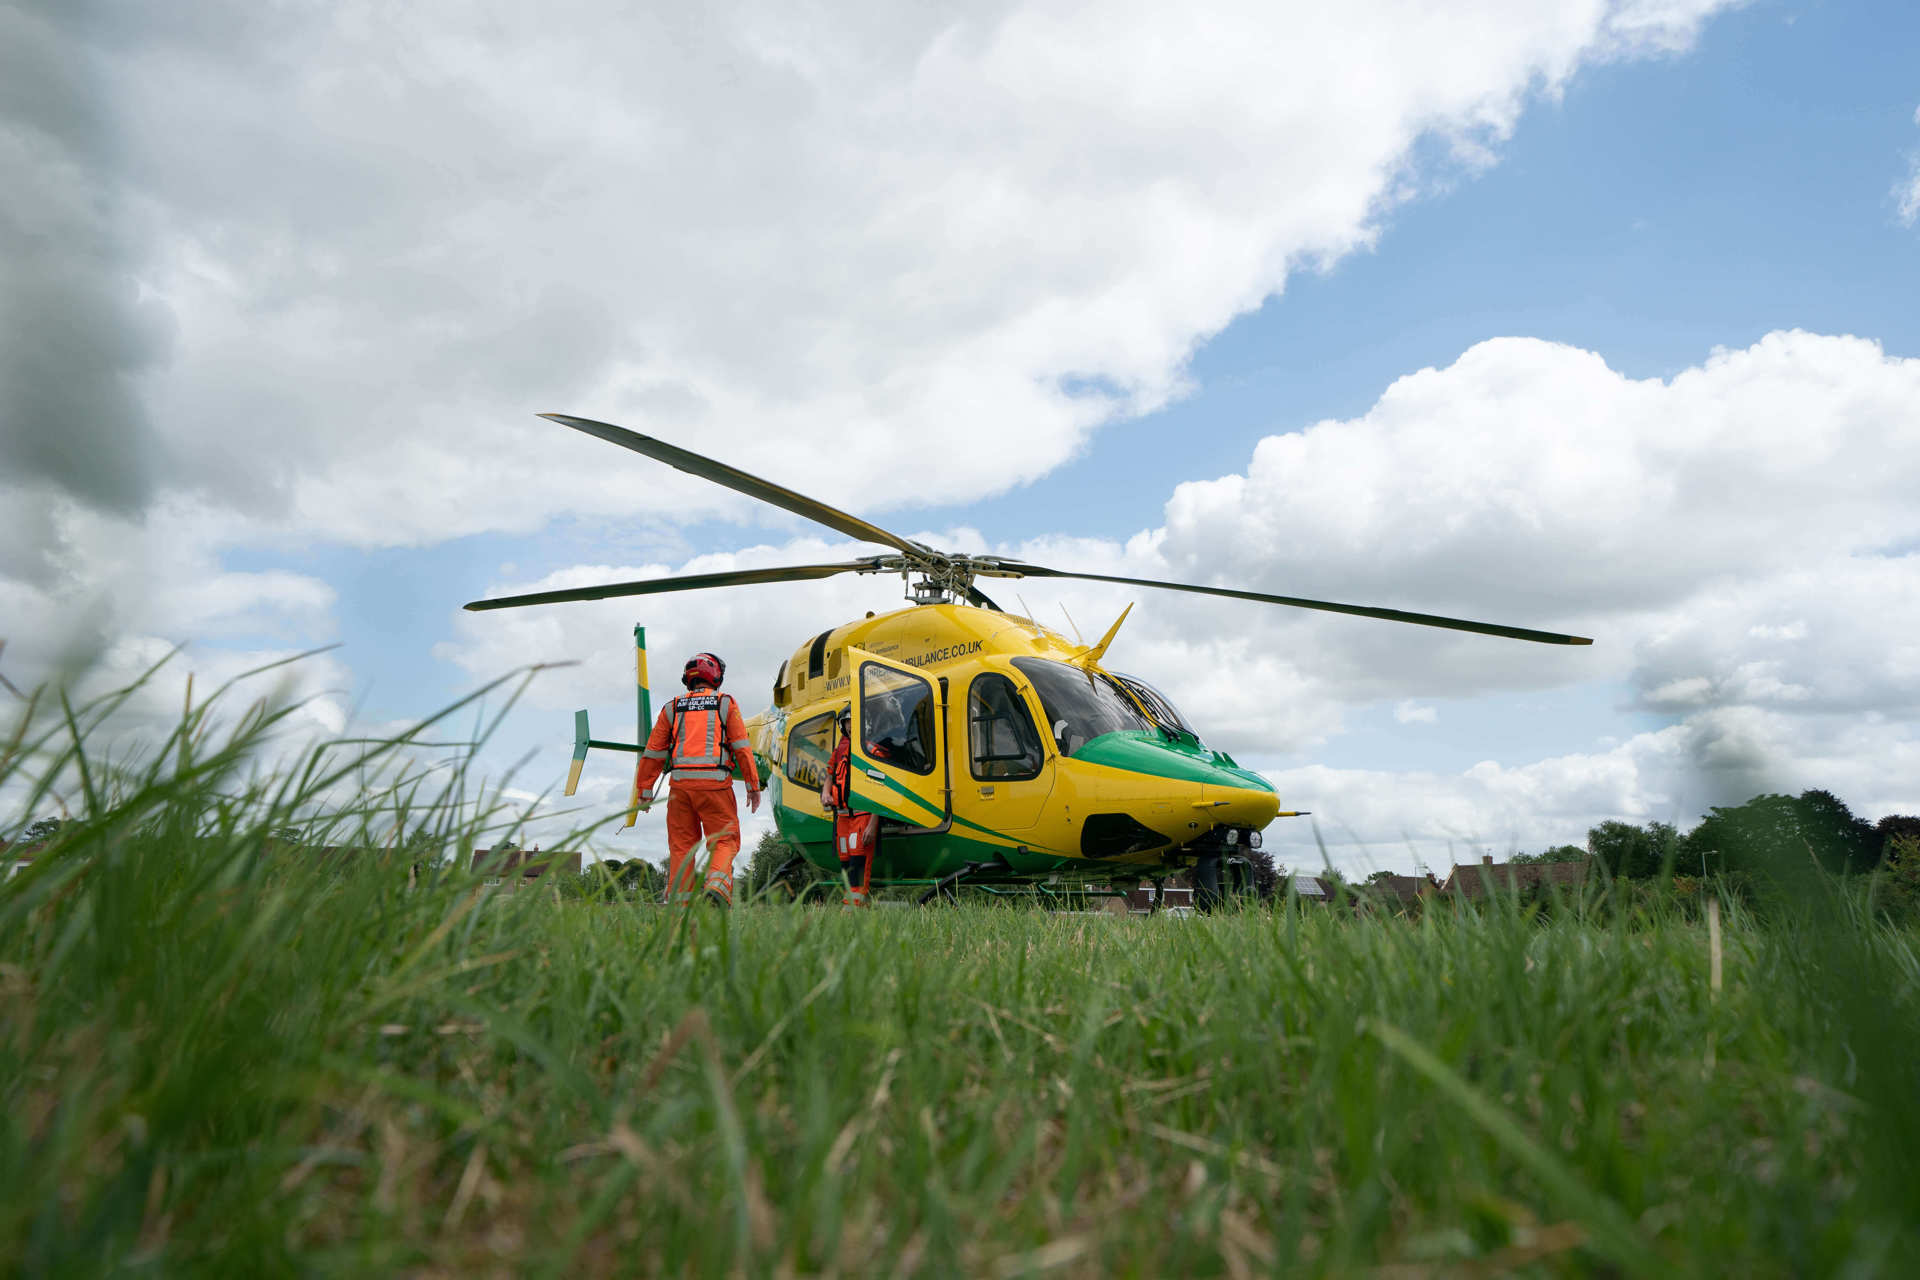 A photo of the yellow and green Bell-429 helicopter in a grassy field featuring two critical care paramedics.